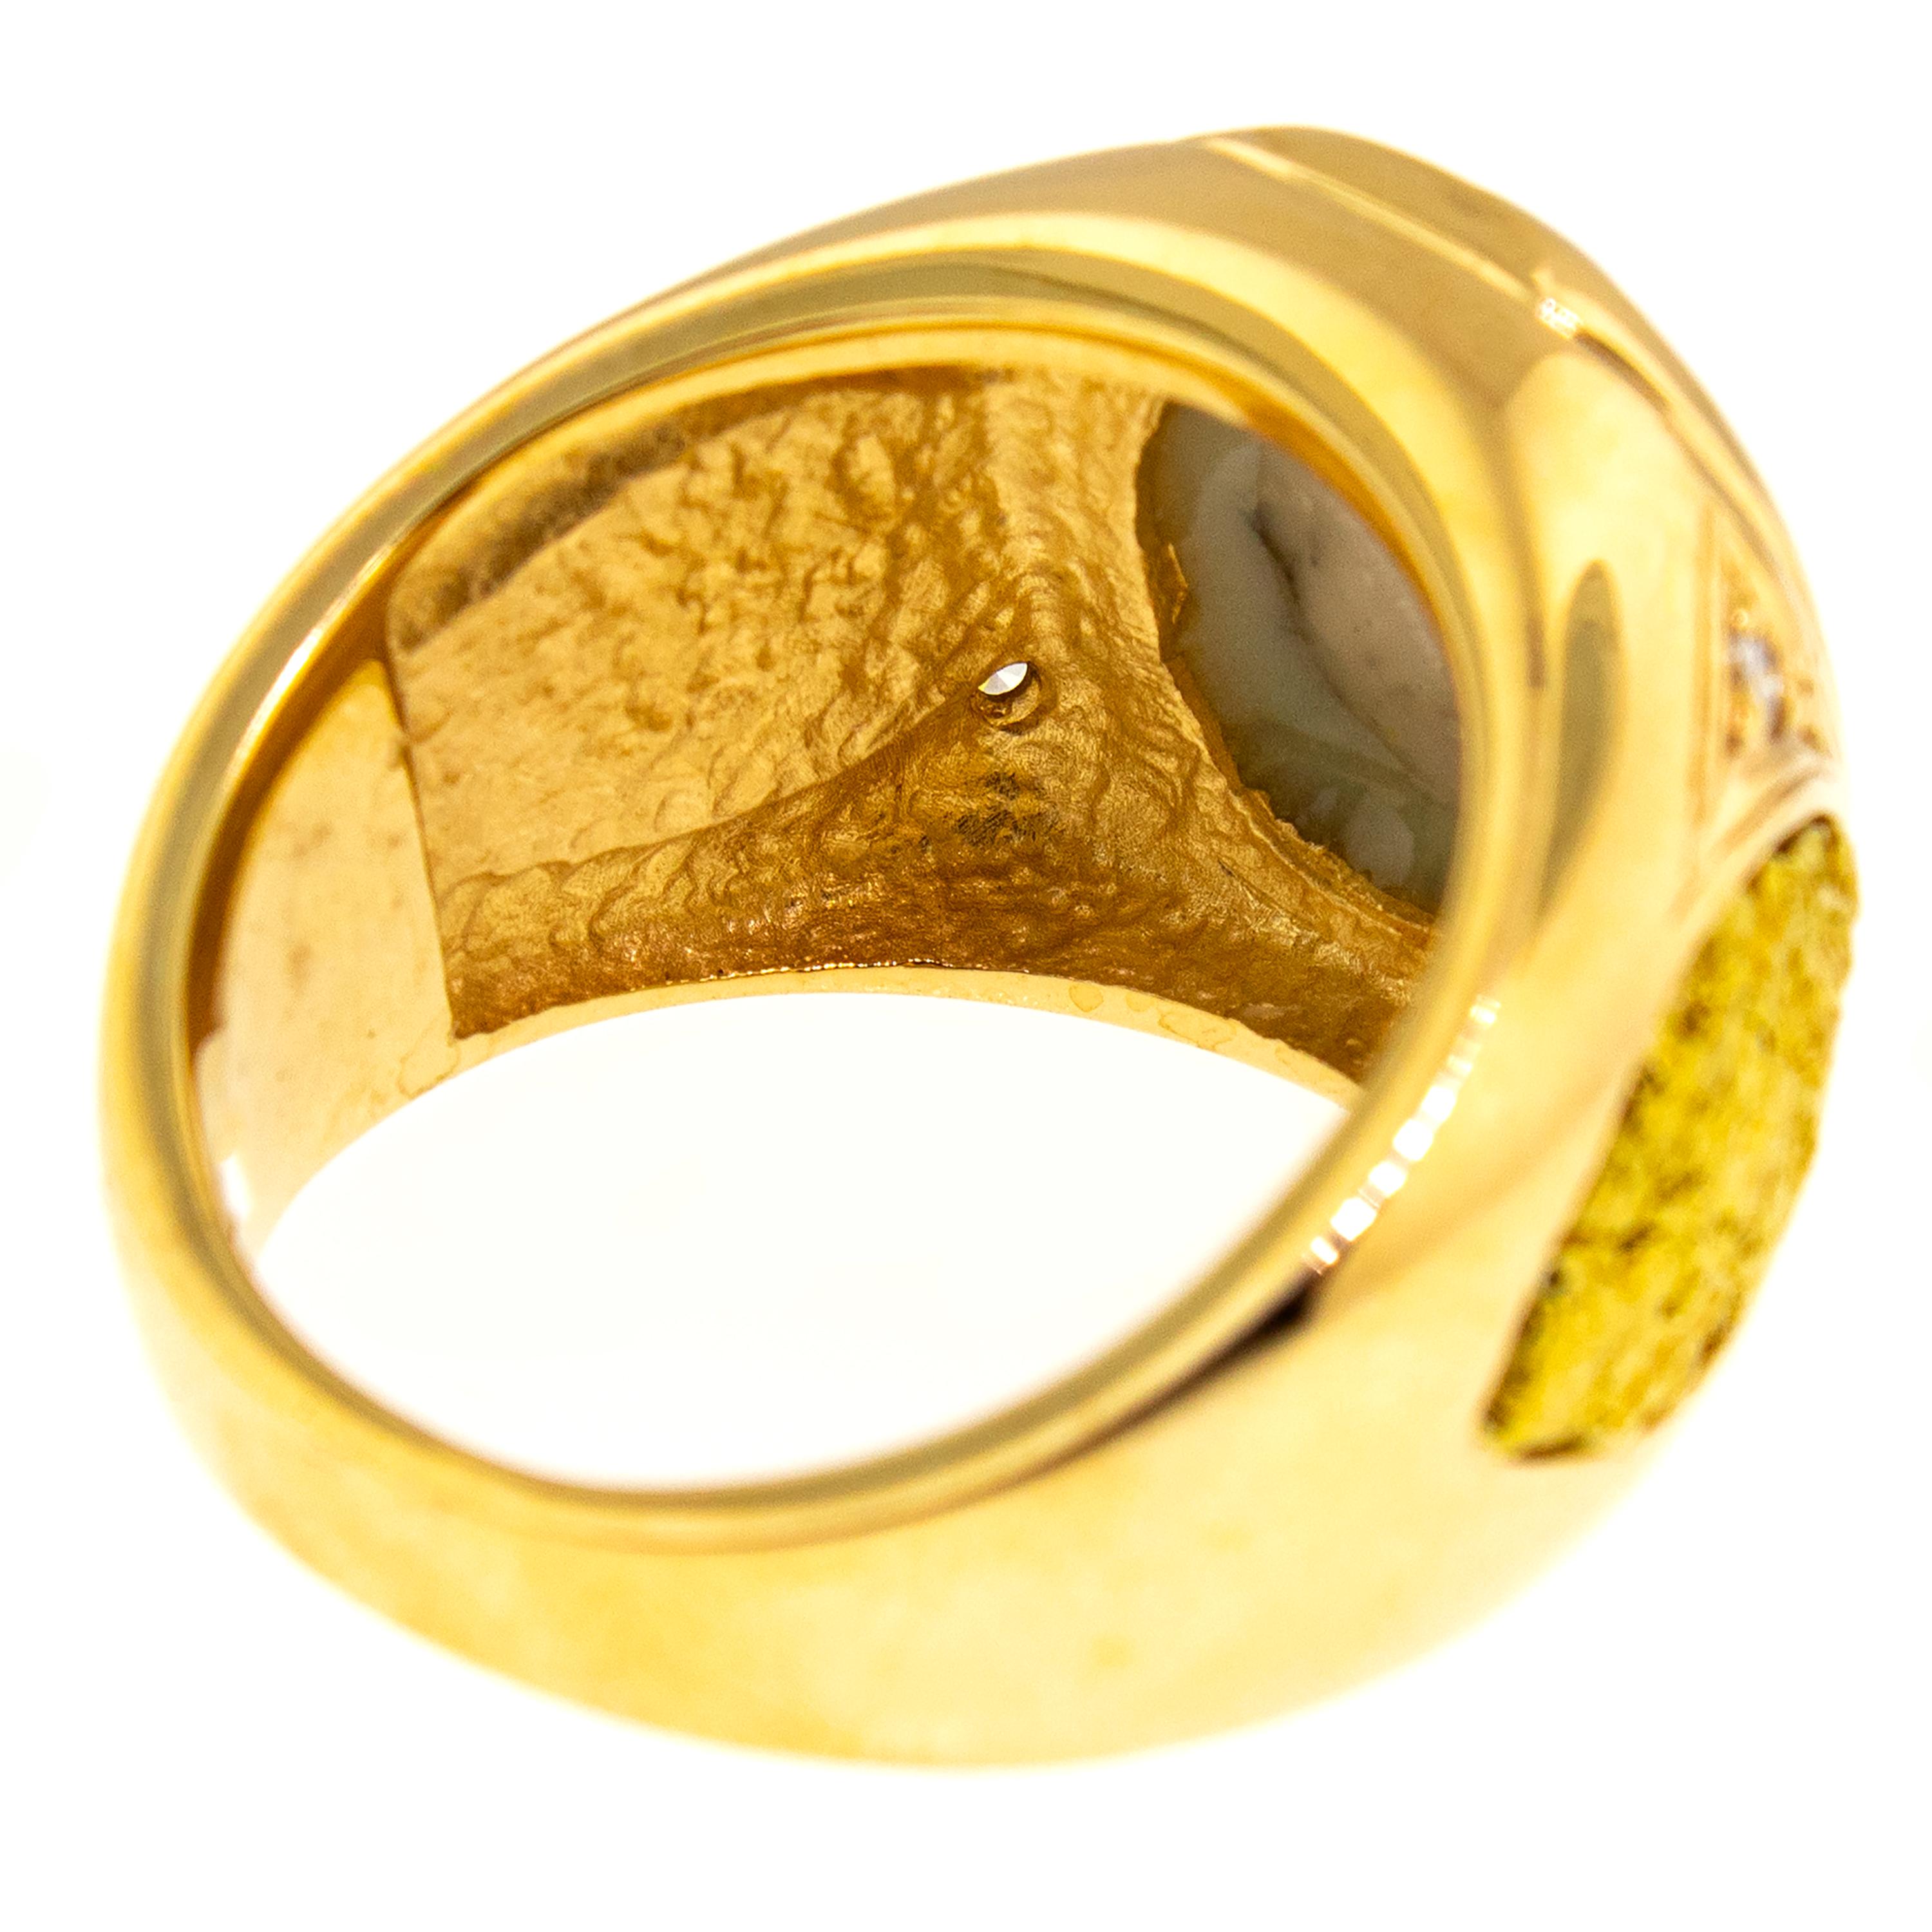 Round Cut Natural Gold Bearing Quartz and Gold Nugget 14kt Gold Men’s Ring